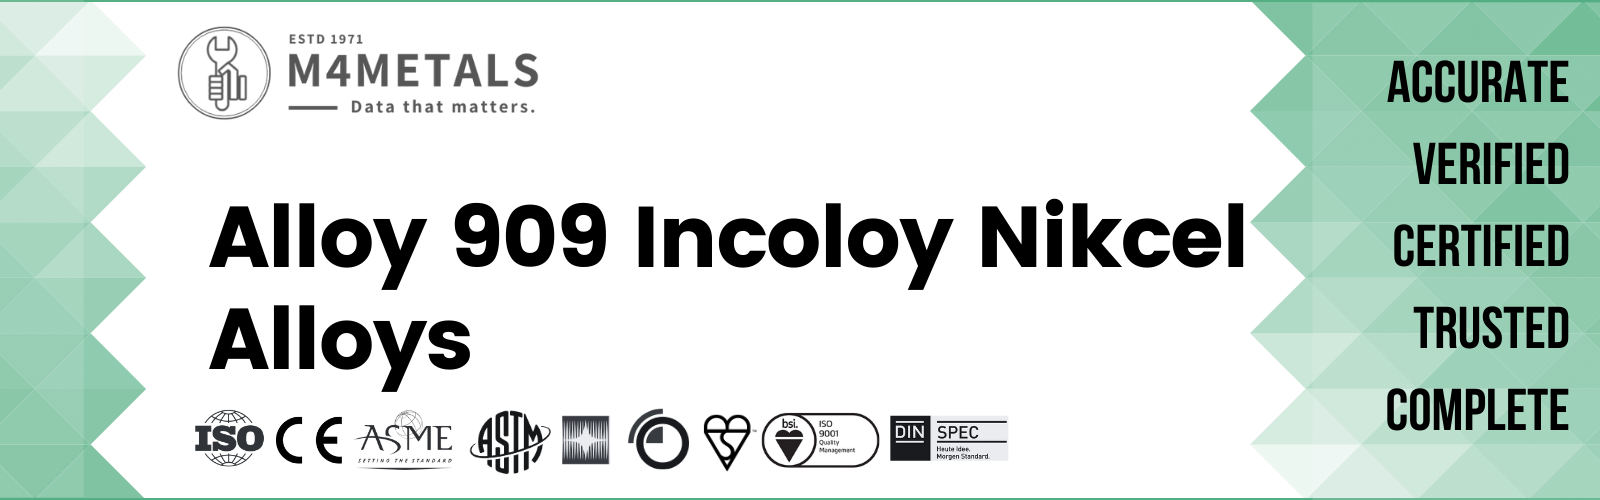 Incoloy Alloy 909